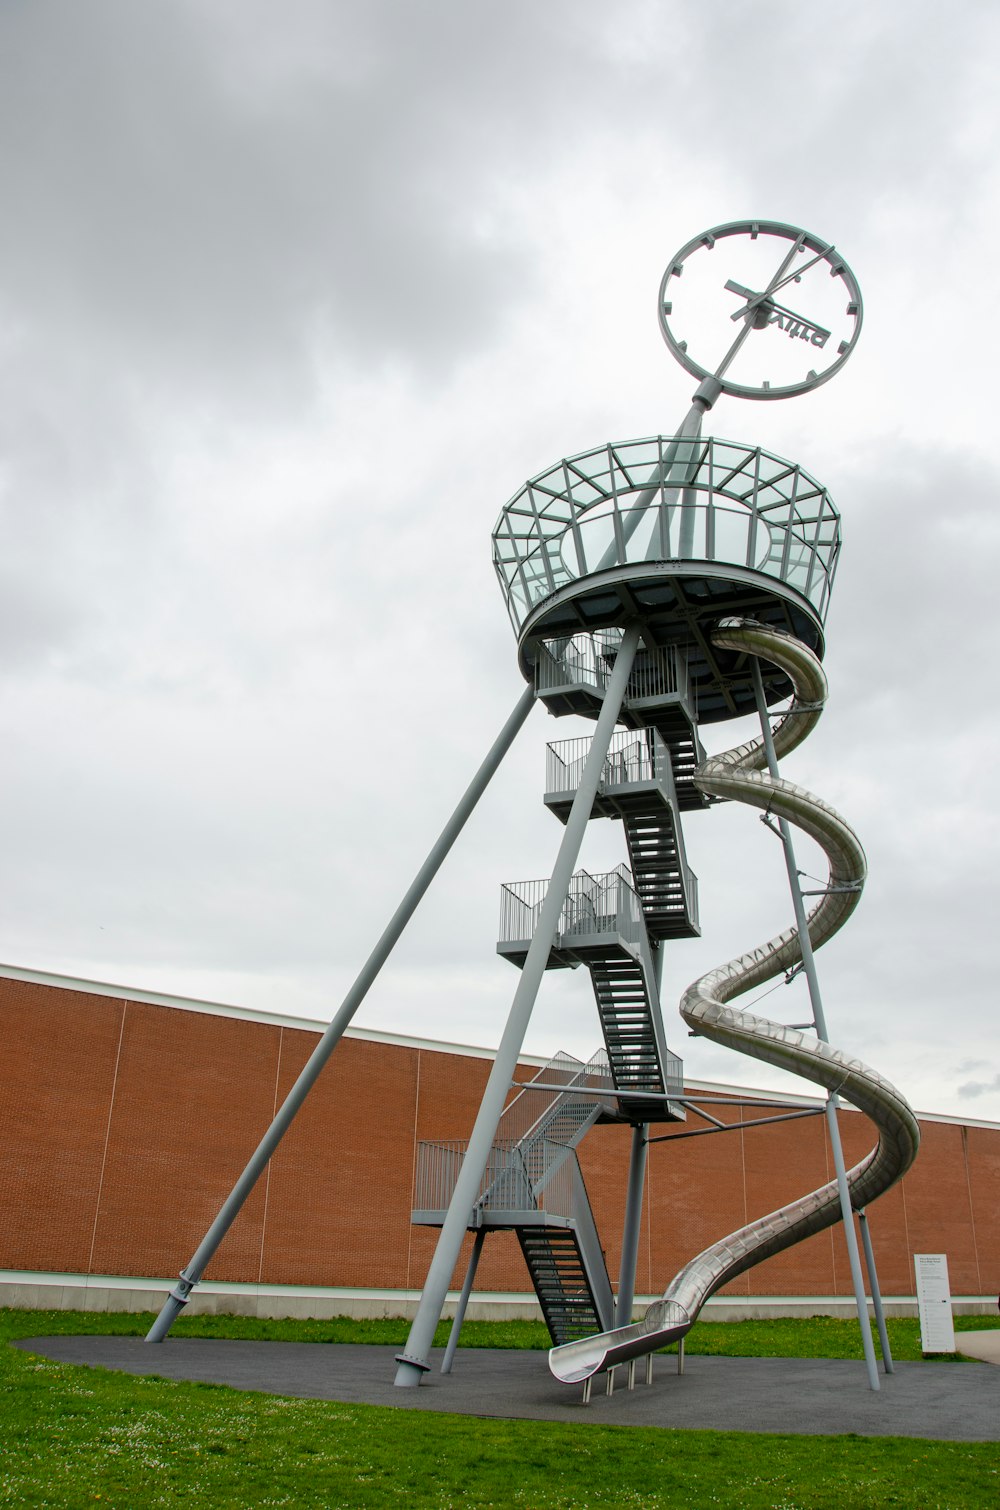 a large metal structure with a clock on top of it